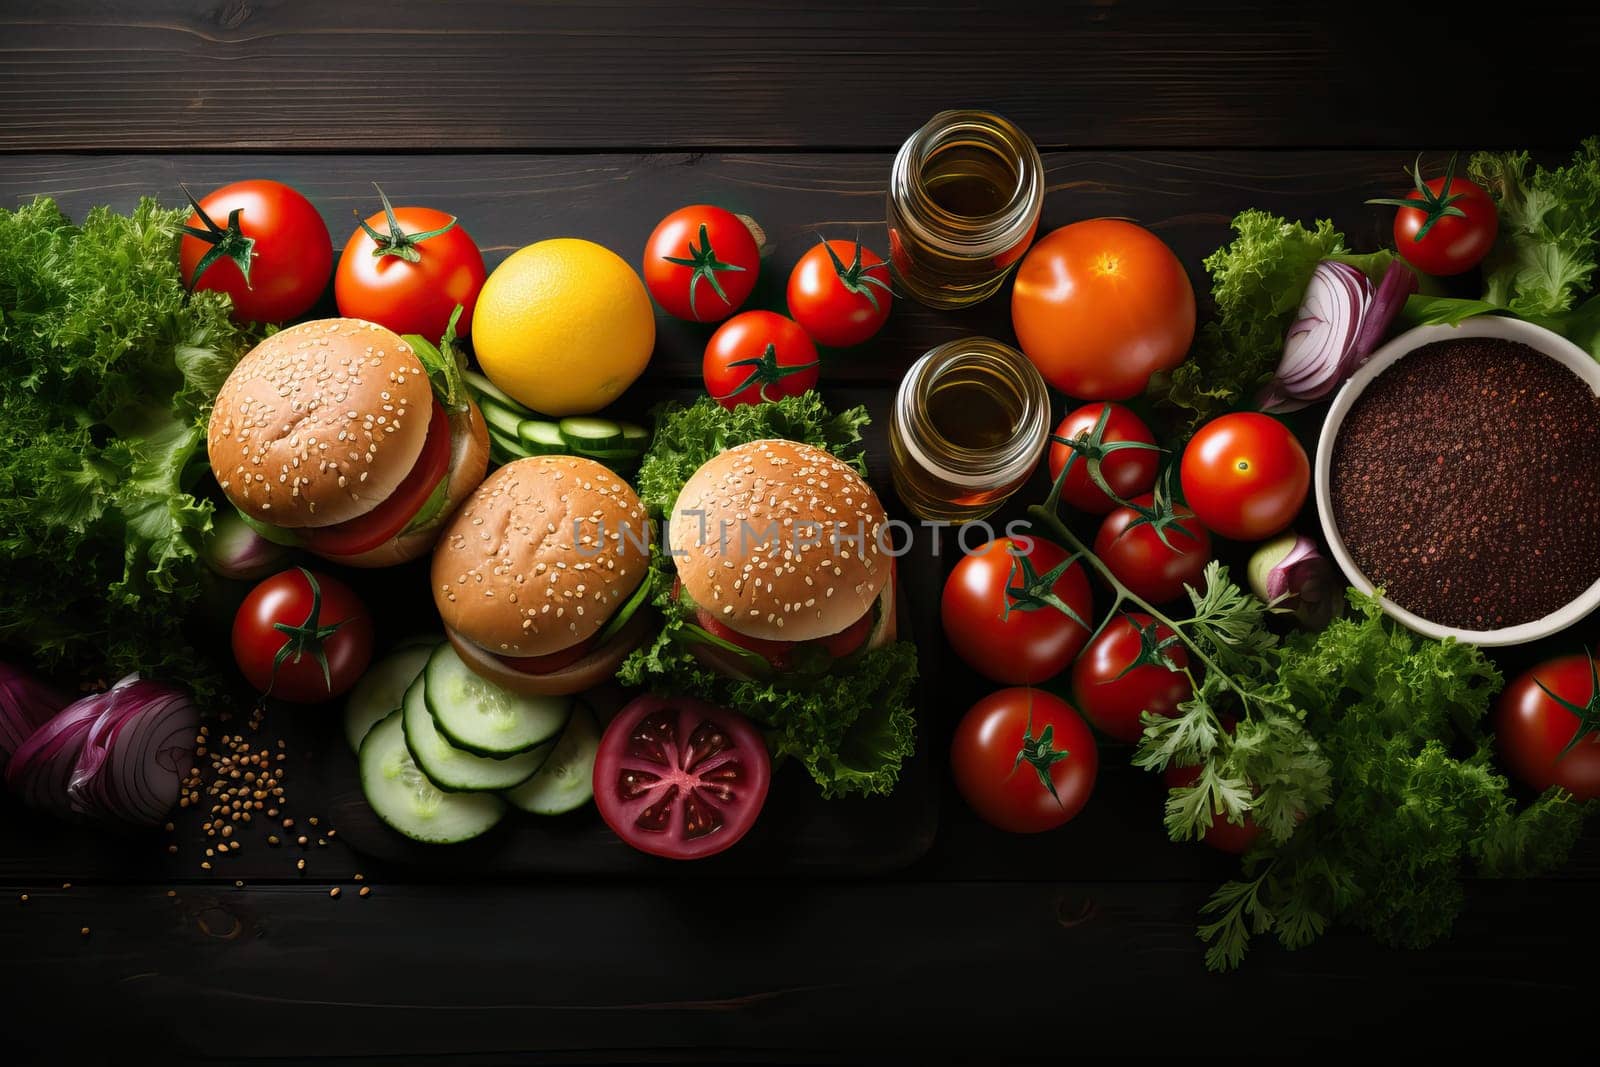 burgers and fresh vegetables on a wooden table, Top view by Niko_Cingaryuk